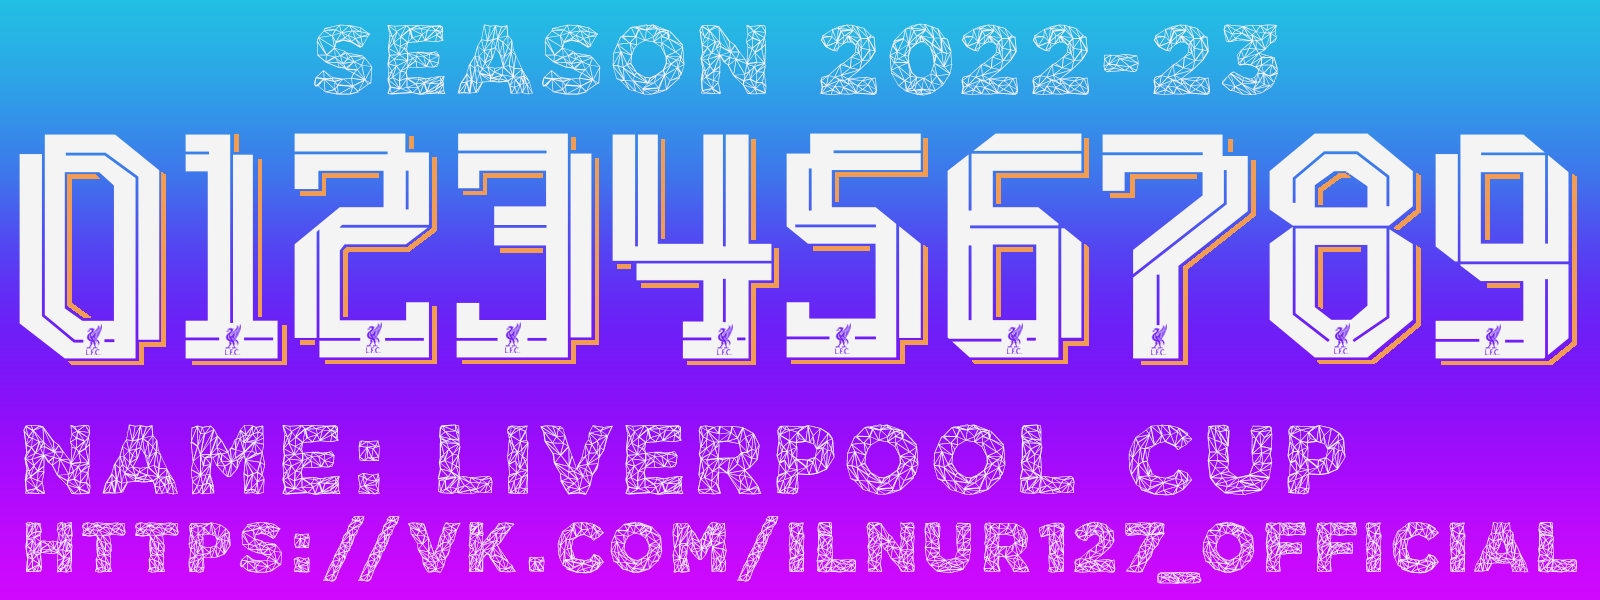 Liverpool Cup 2022-23 (kitnumbers).png